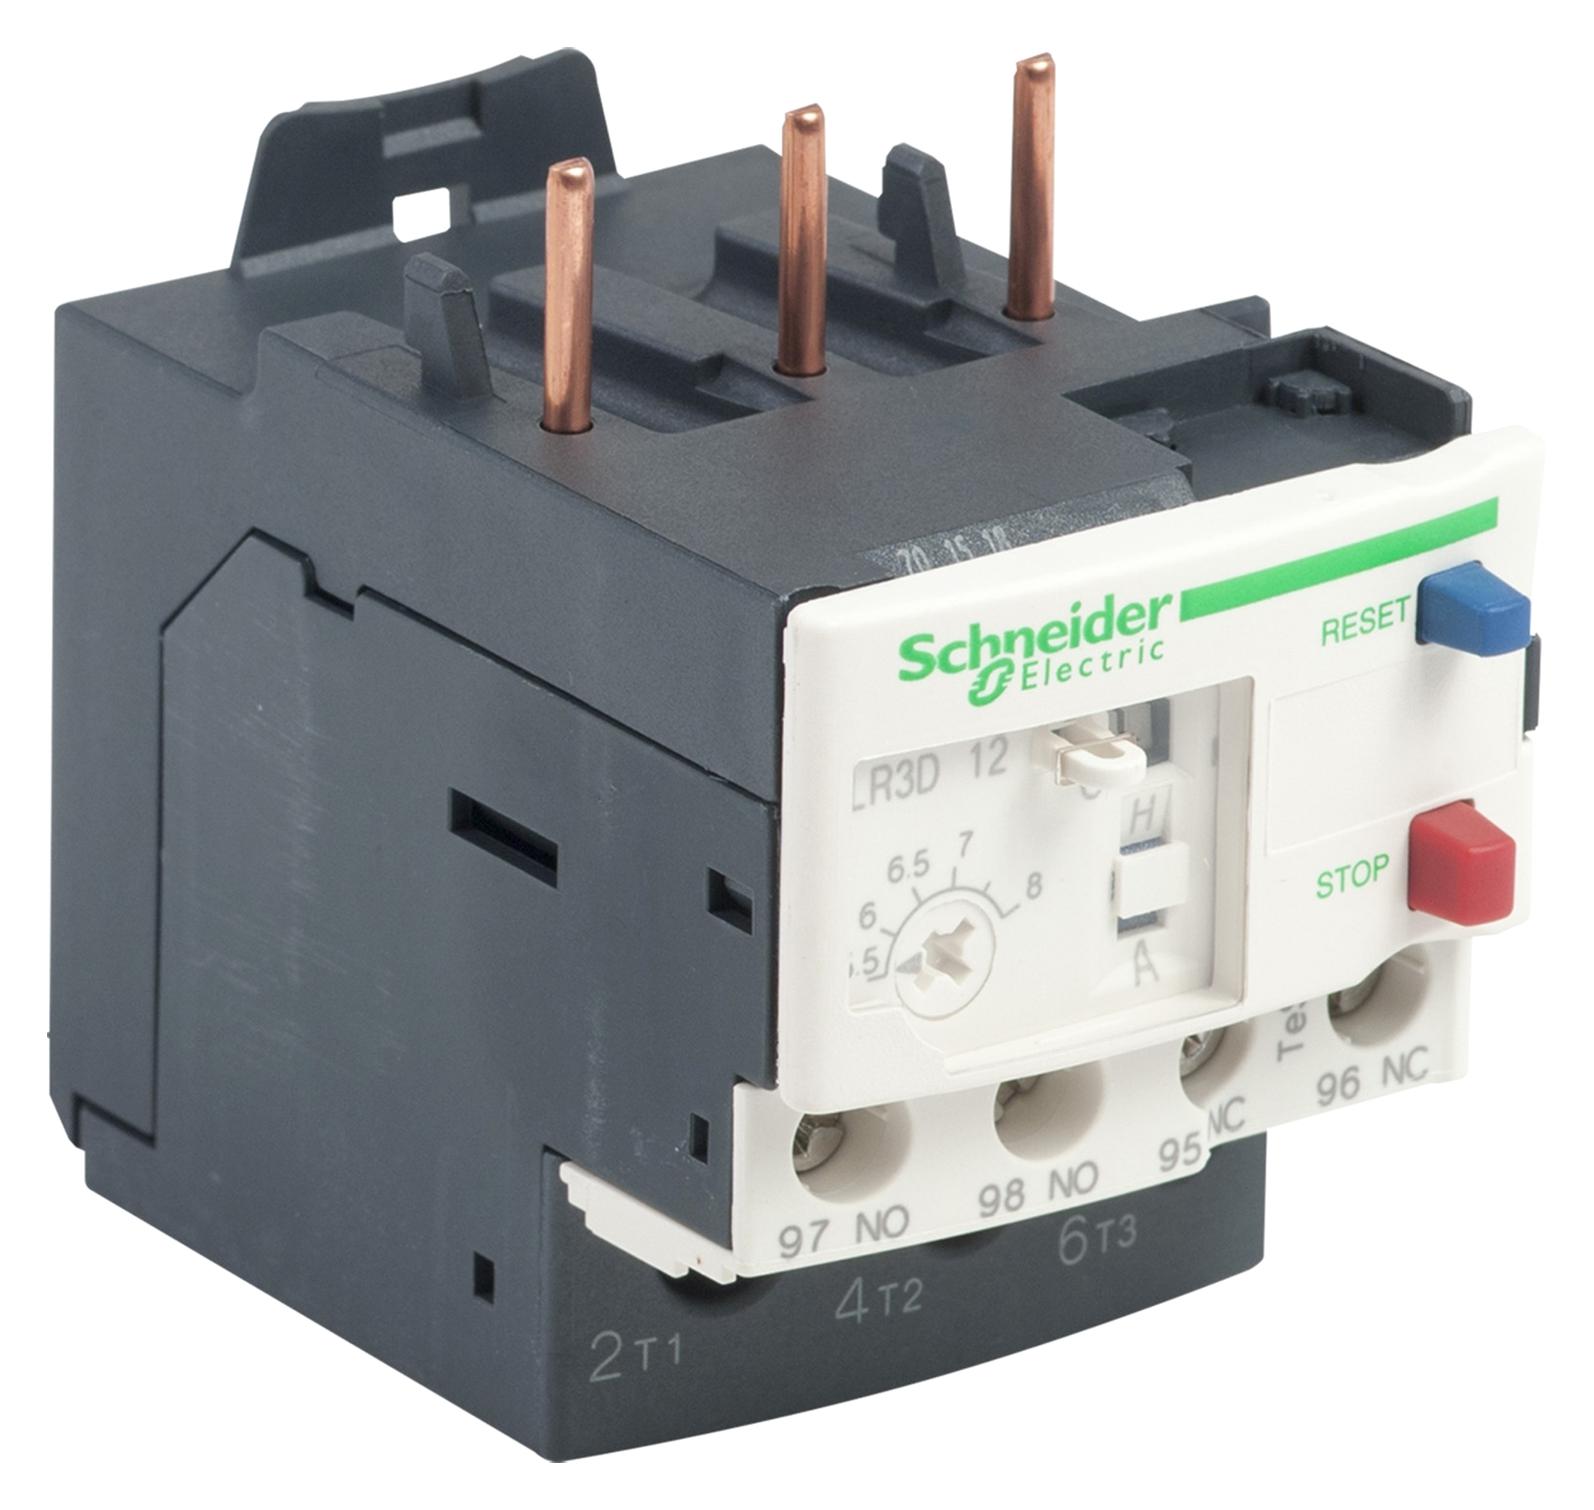 LR3D12 THERMAL OVERLOAD RELAY, 5.5A-8A, 690VAC SCHNEIDER ELECTRIC